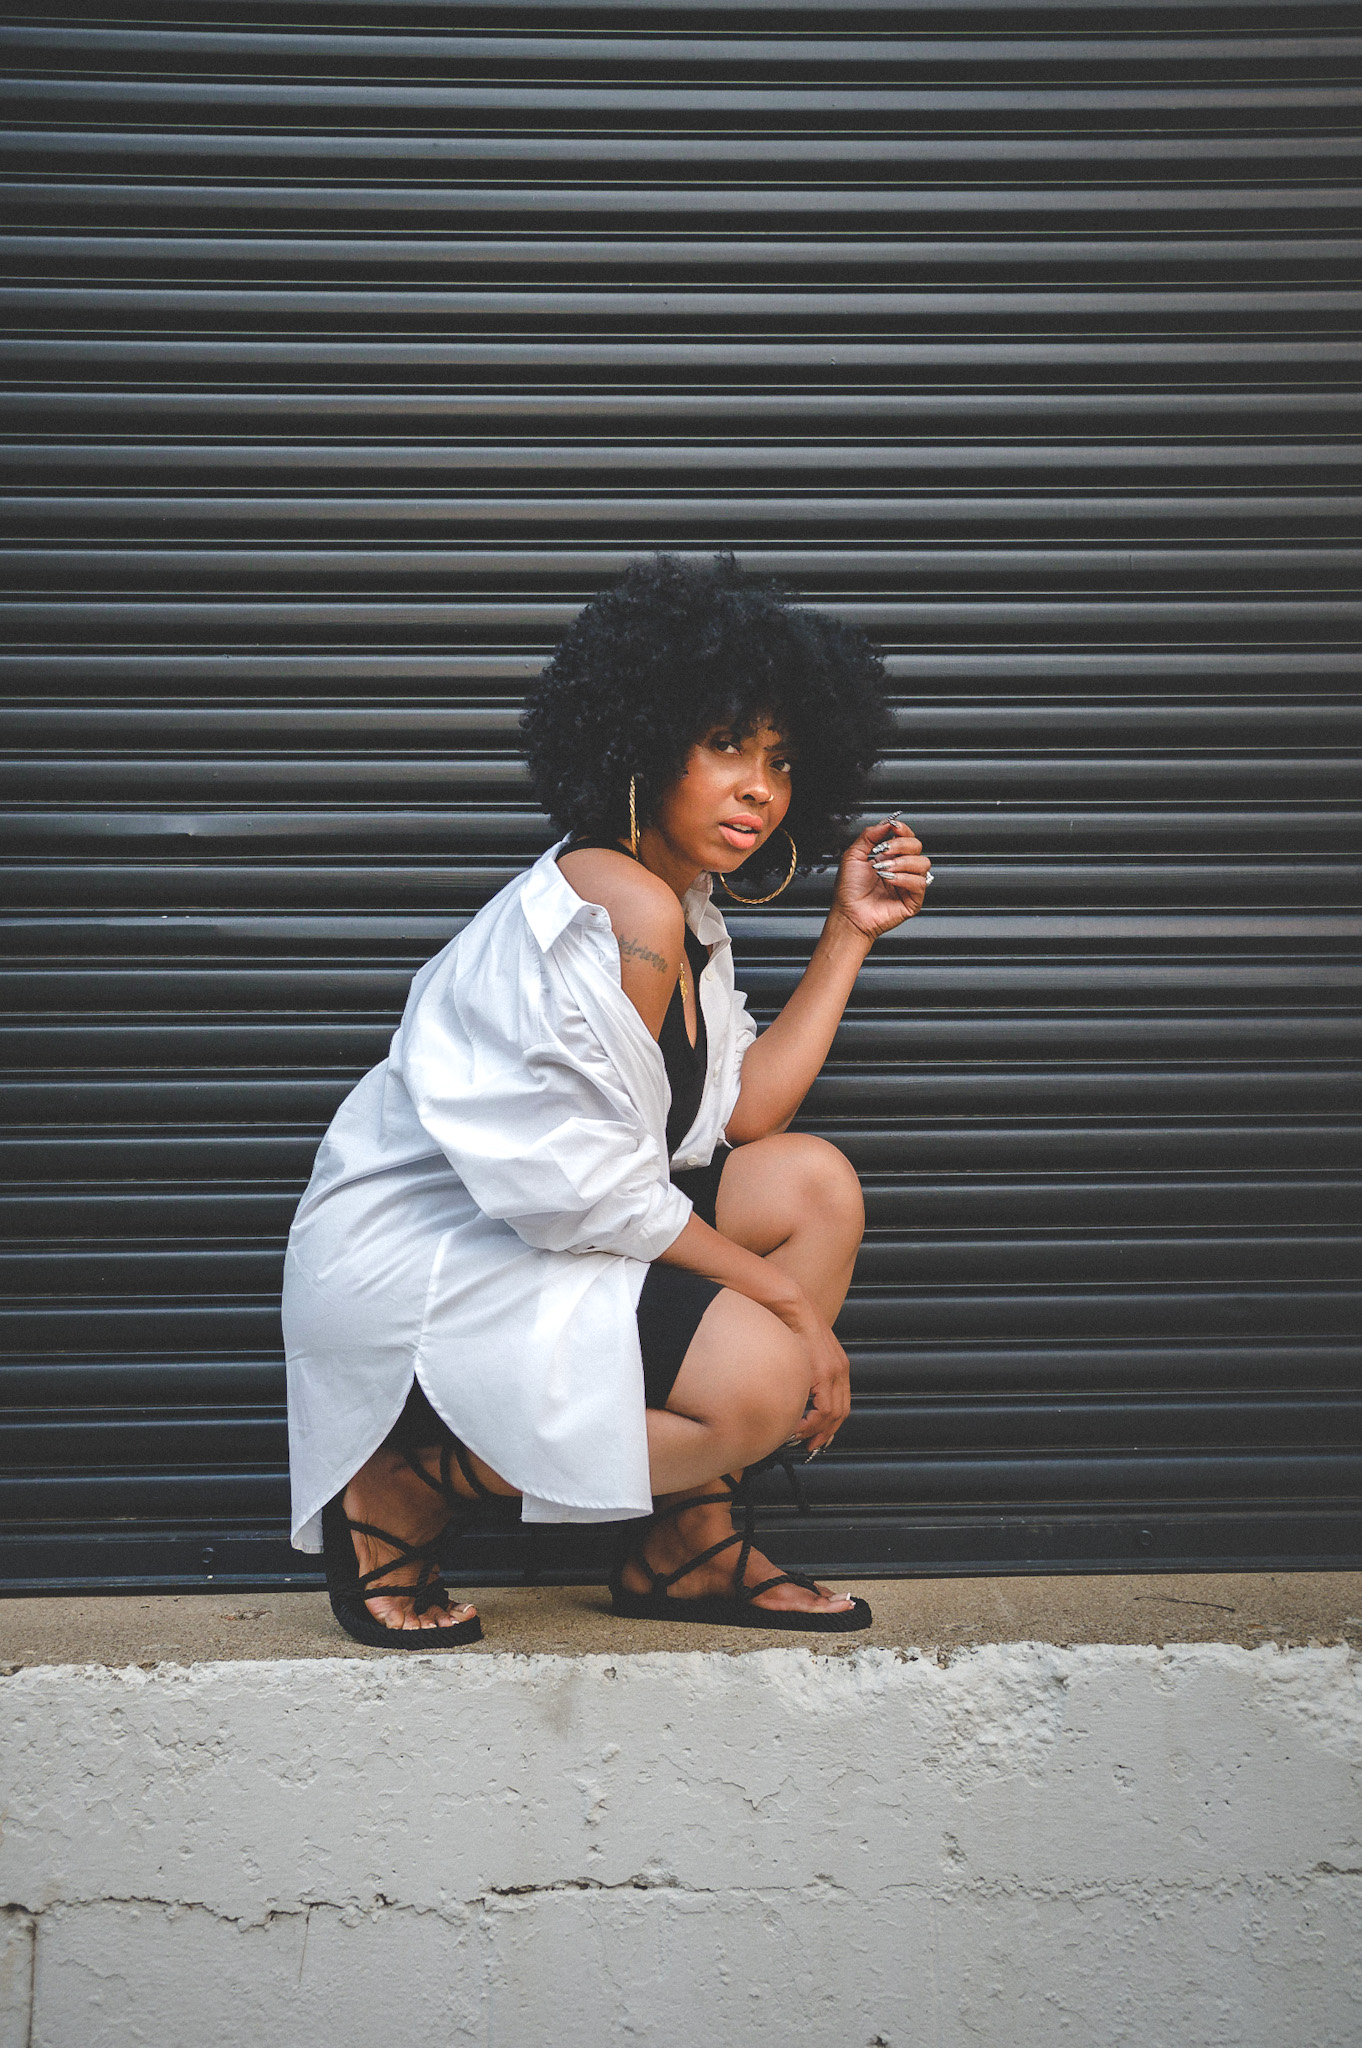 SWEENEE STYLE, BLACK BASICS, HOW TO WEAR BIKER SHORTS, HOW TO WEAR NATURAL HAIR, HOW TO WEAR A WHITE BUTTON DOWN TOP, NATURAL CURLS, INDIANAPOLIS FASHION BLOG, INDIANA FASHION BLOGGER, BLACK GIRLS WHO BLOG, BLACK GIRL FASHION BLOGGER